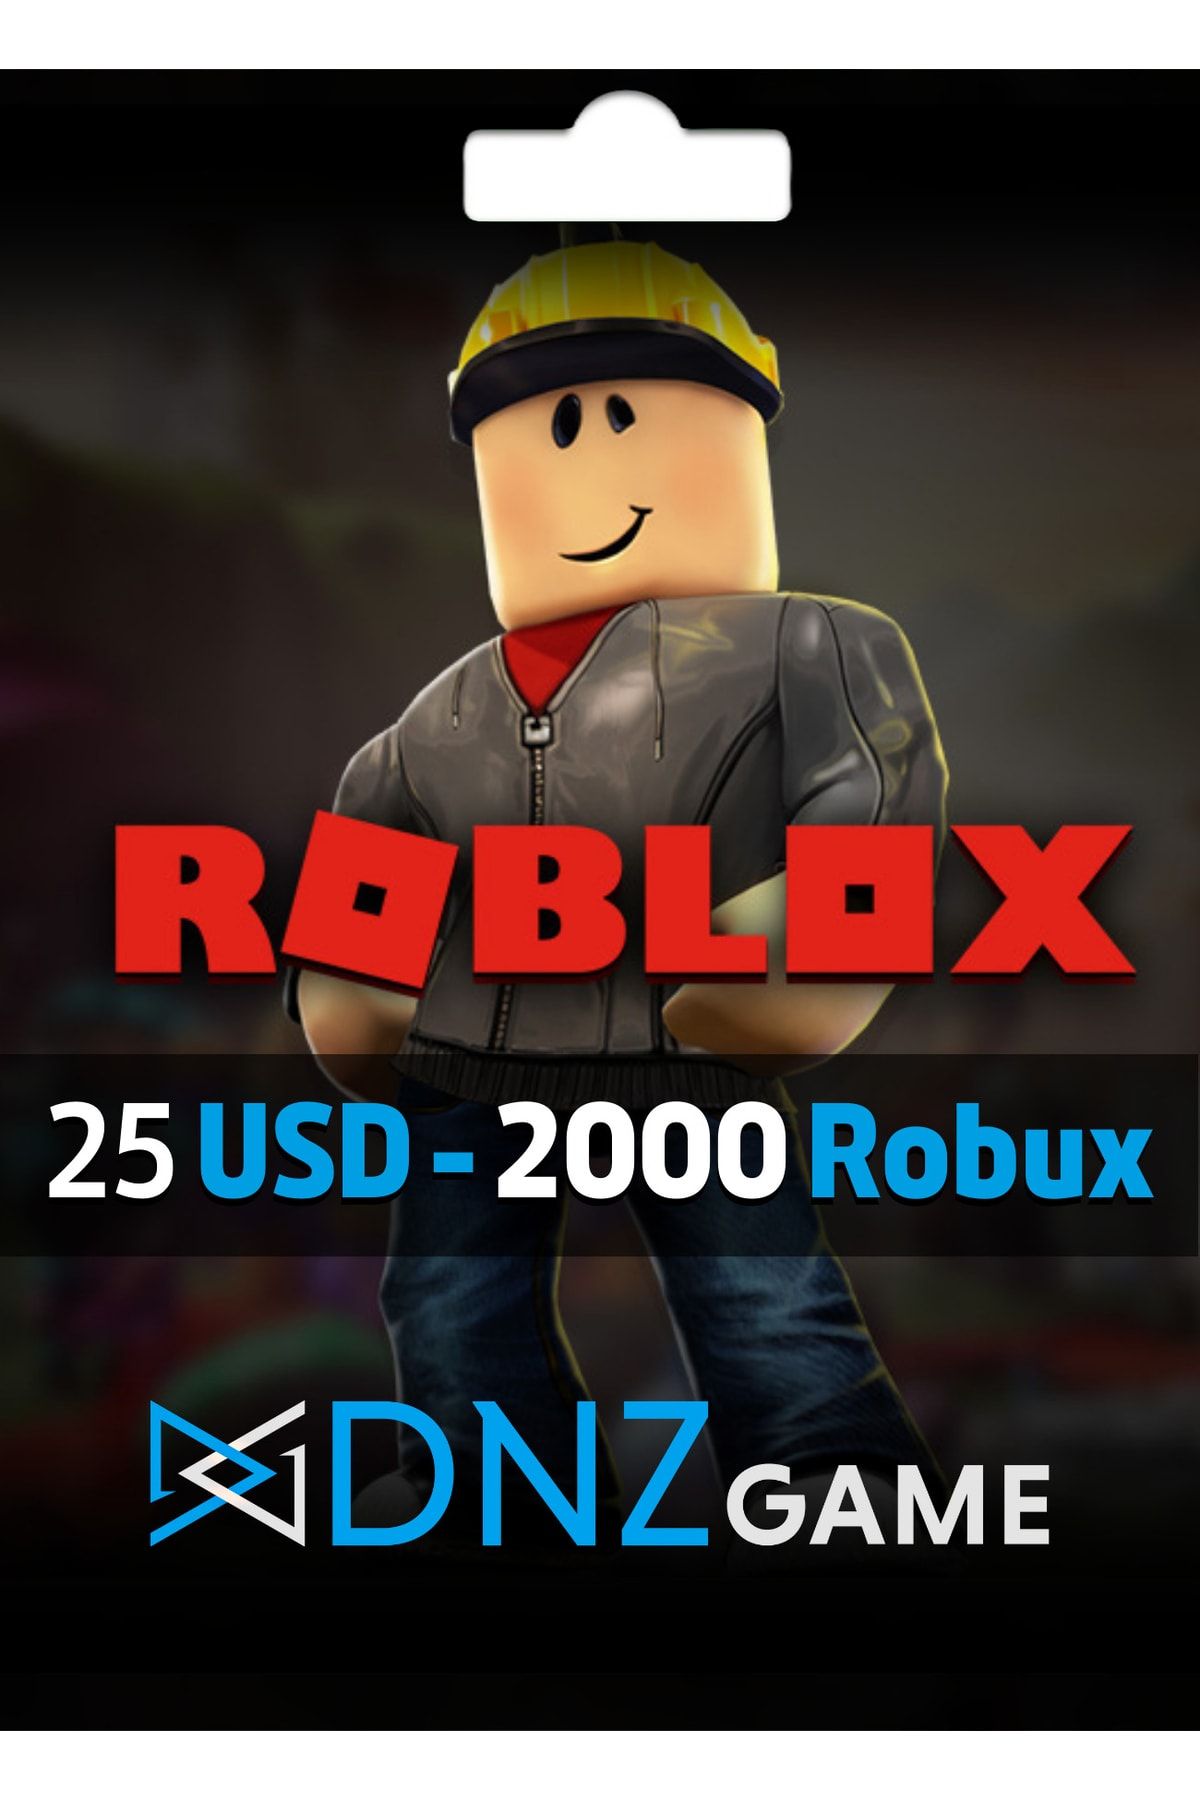 Roblox Gift Card 25 Usd 2000 Robux